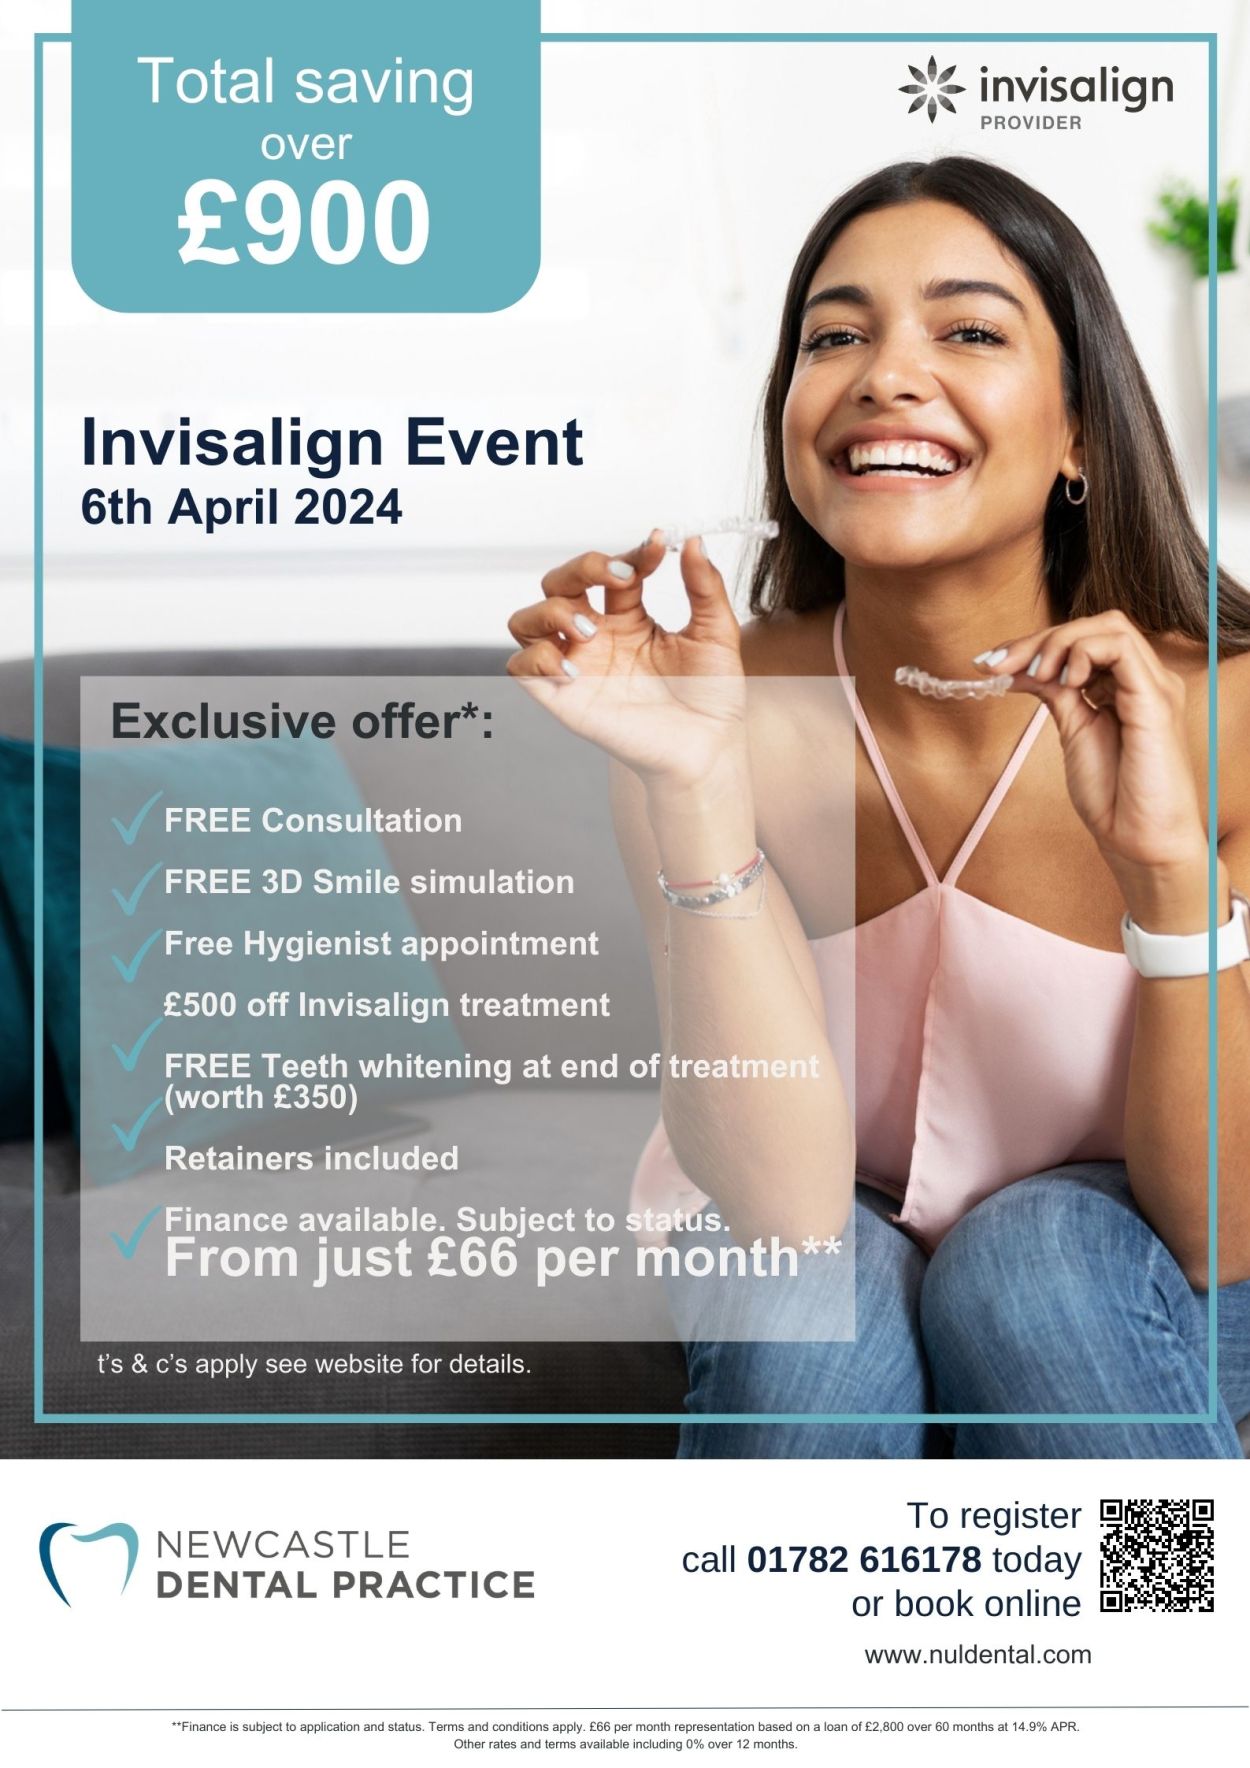 Invisalign save £900 with our latest promotion